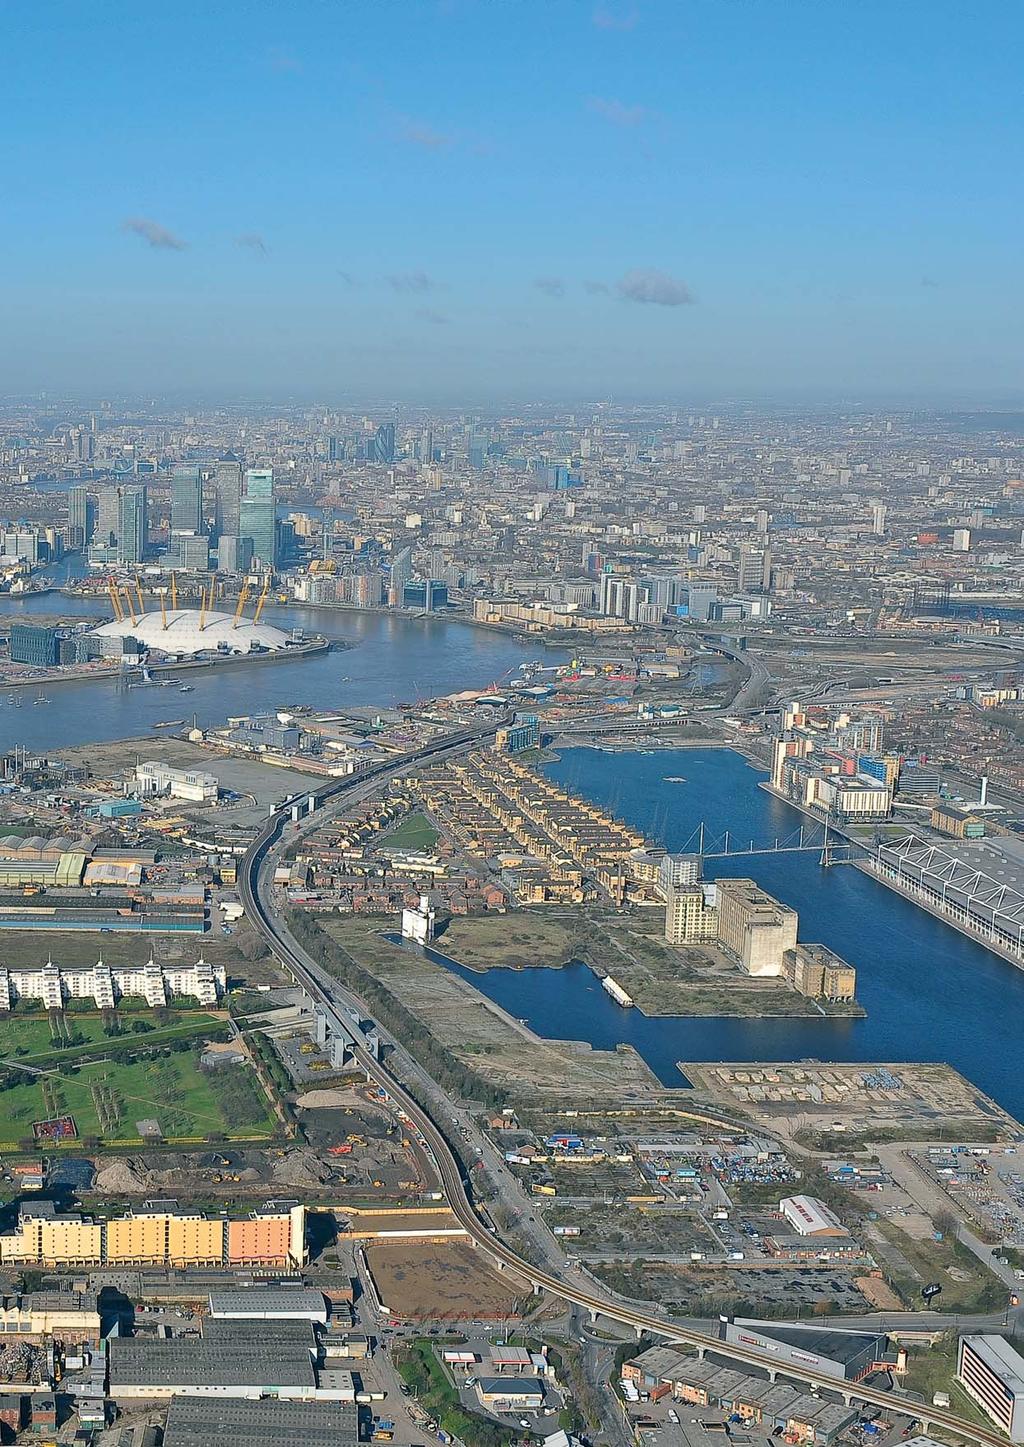 Thames Barrier Park The London Eye Canary Wharf Thames Clipper Ferry Service The O2 Arena Pontoon Dock DLR The City